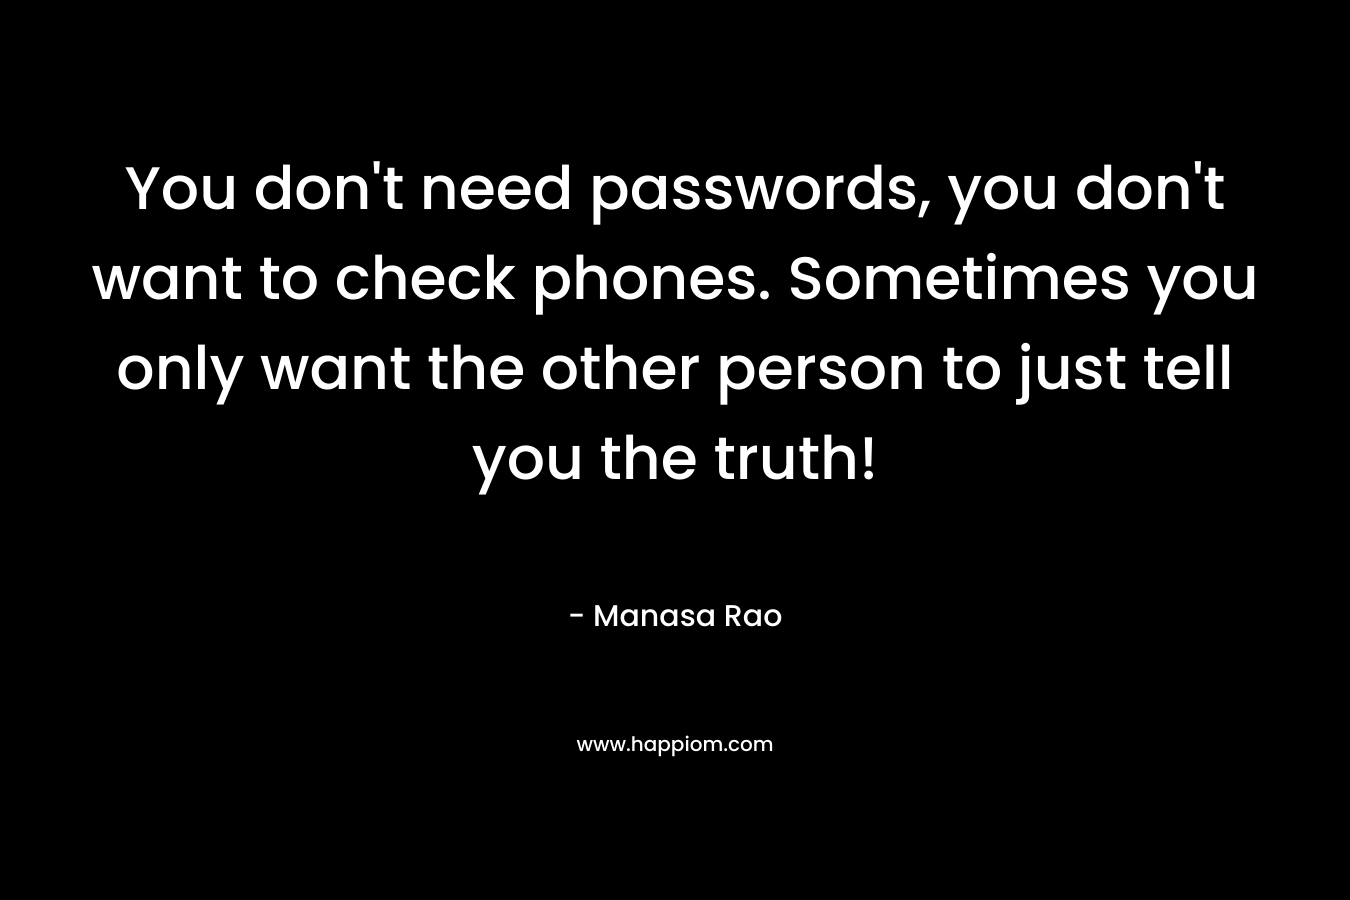 You don’t need passwords, you don’t want to check phones. Sometimes you only want the other person to just tell you the truth! – Manasa Rao